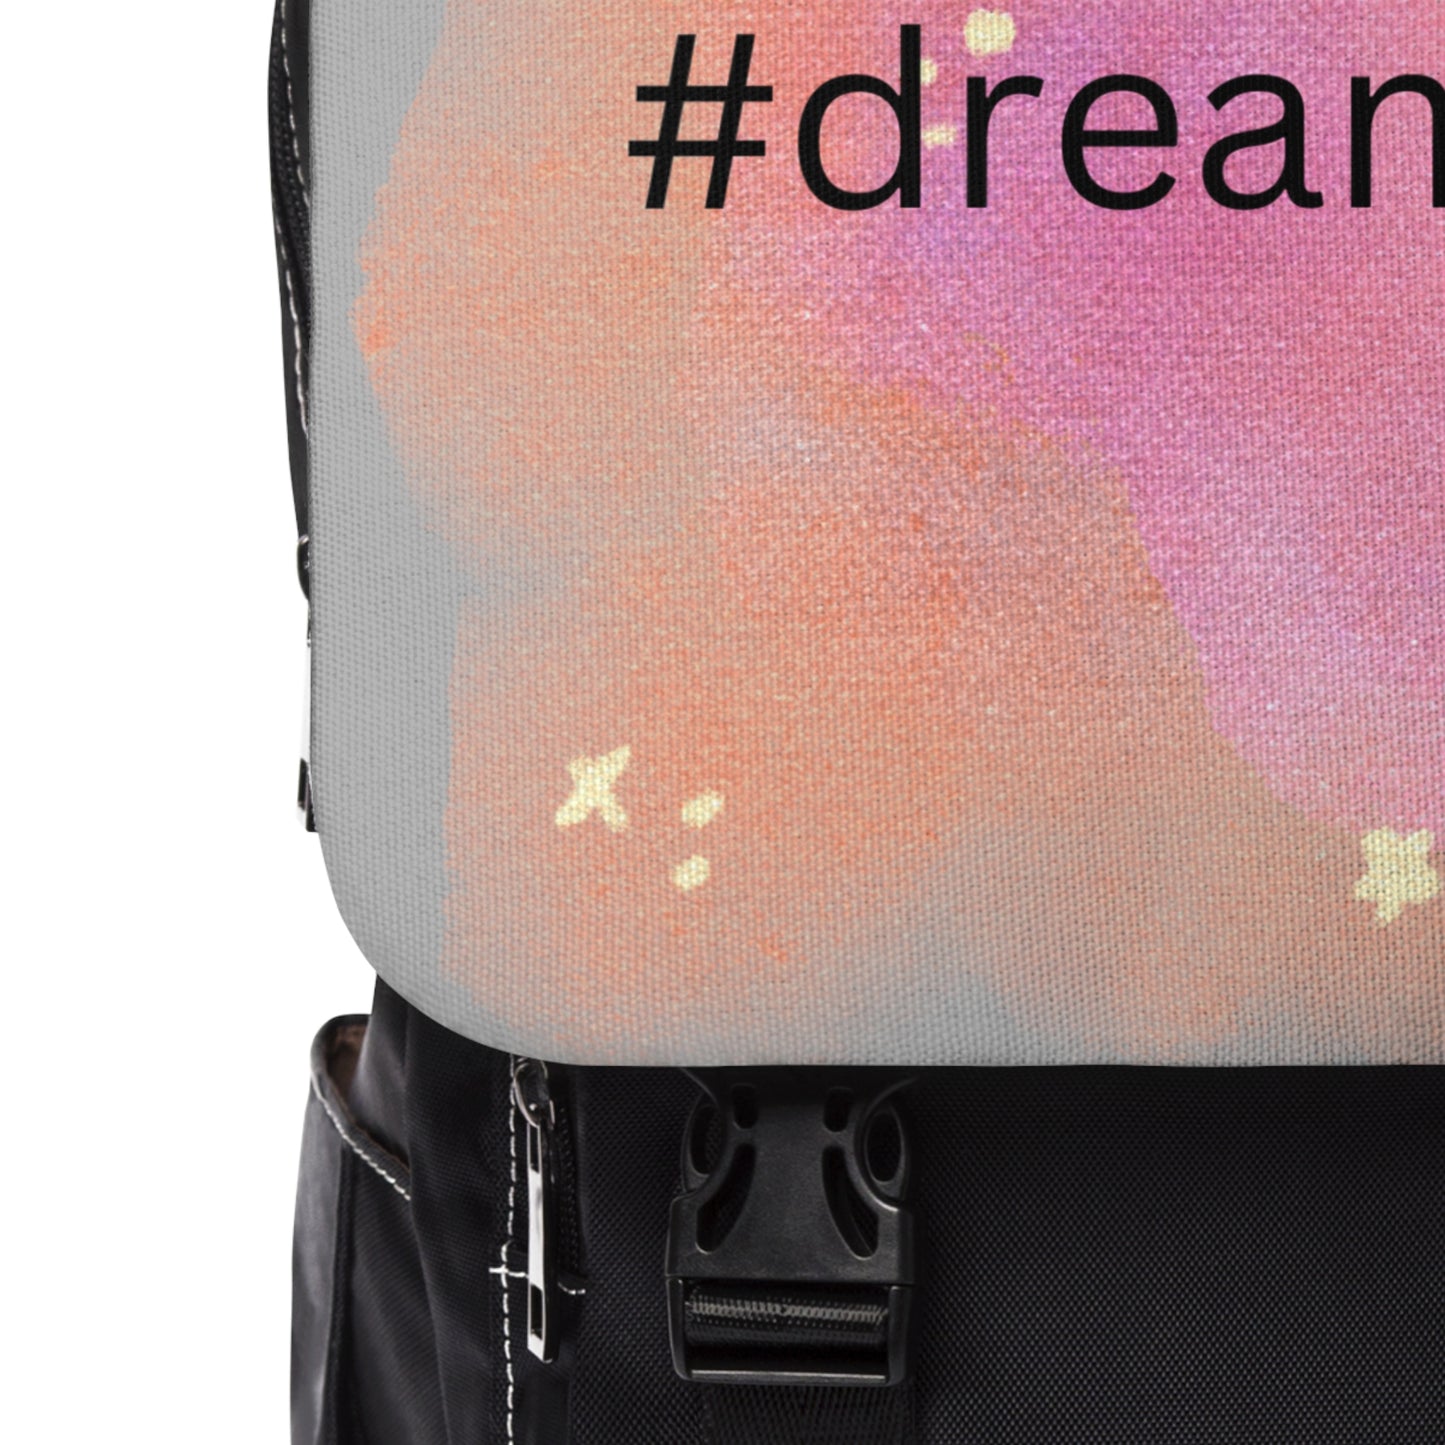 dreamBIG Unisex Casual Shoulder Backpack